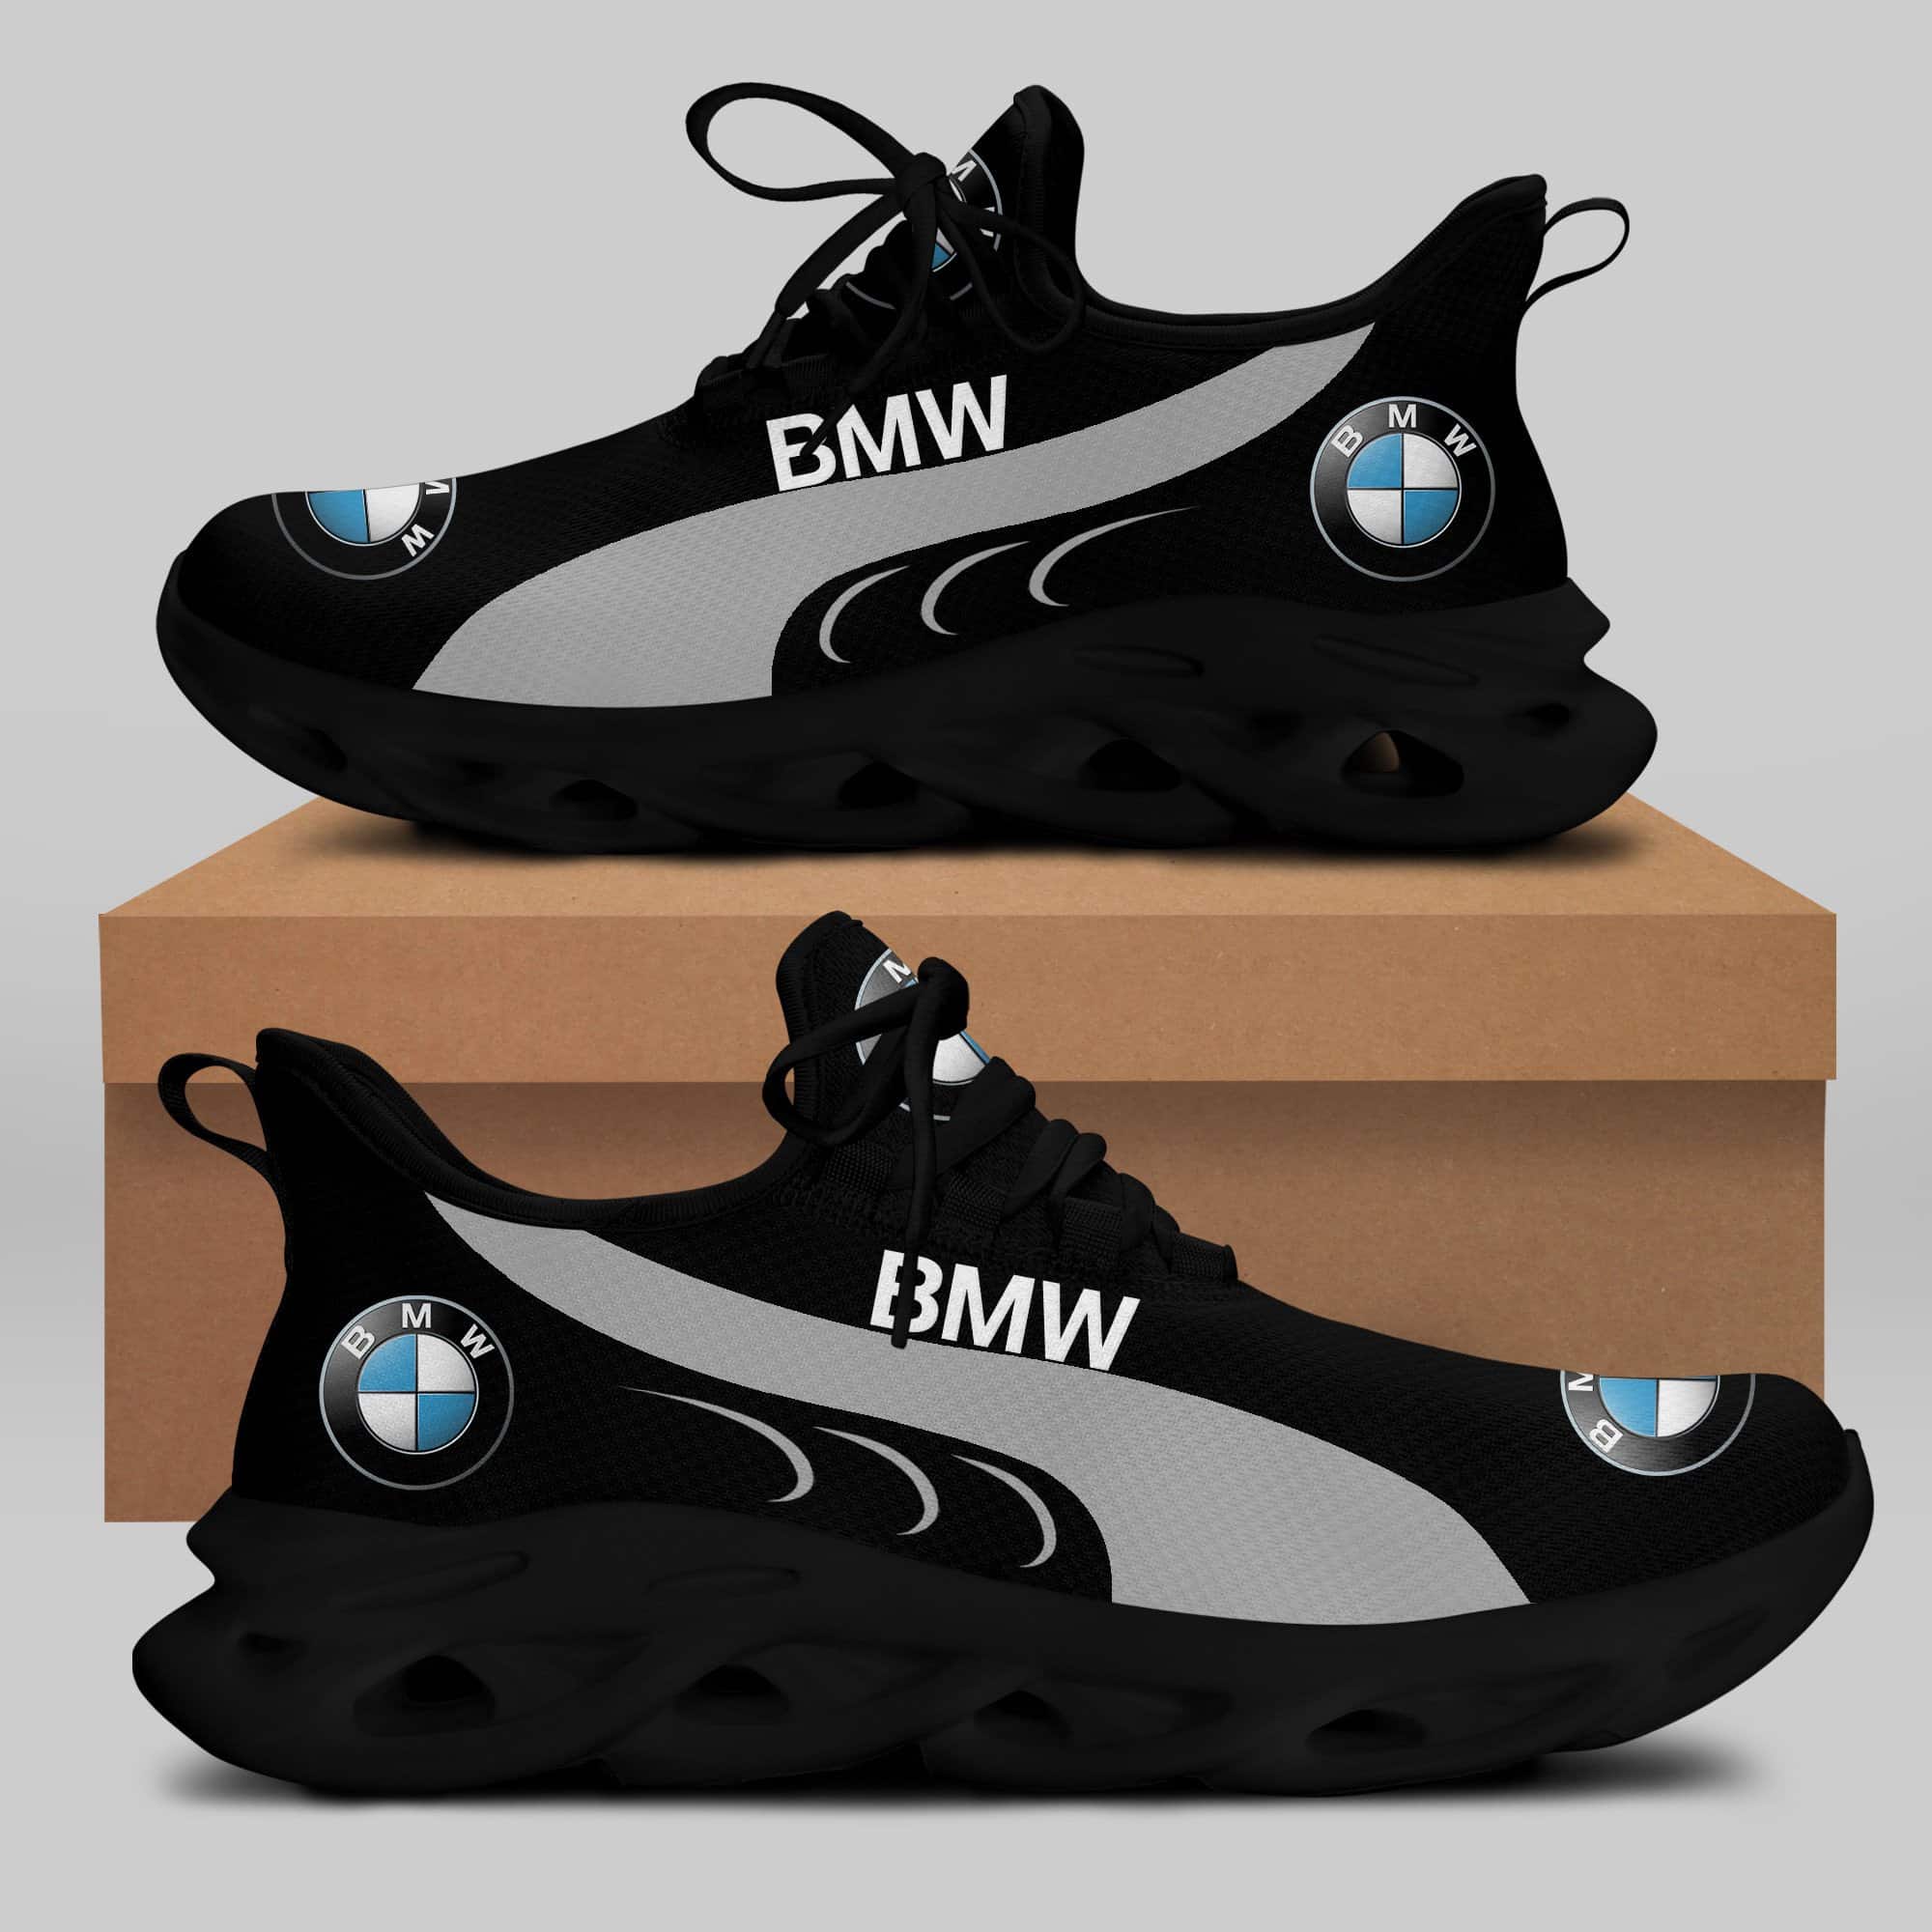 Bmw Running Shoes Max Soul Shoes Sneakers Ver 49 1